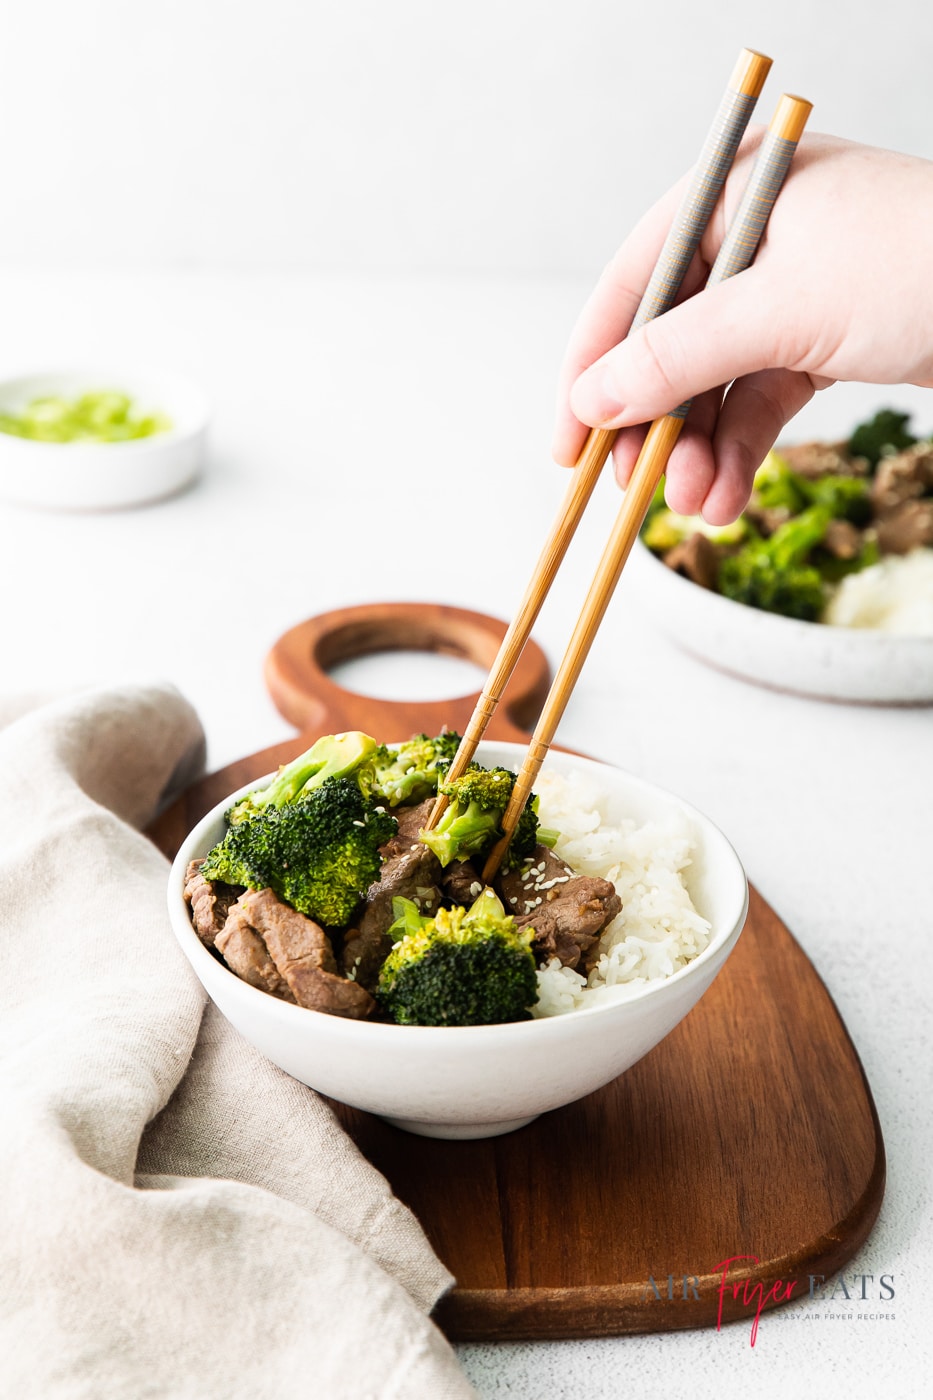 vertical photo of a brown chopping board with a white bowl on containing beef, broccoli and rice. Above the bowl is a hand holding a piece of broccoli between a set of chopsticks